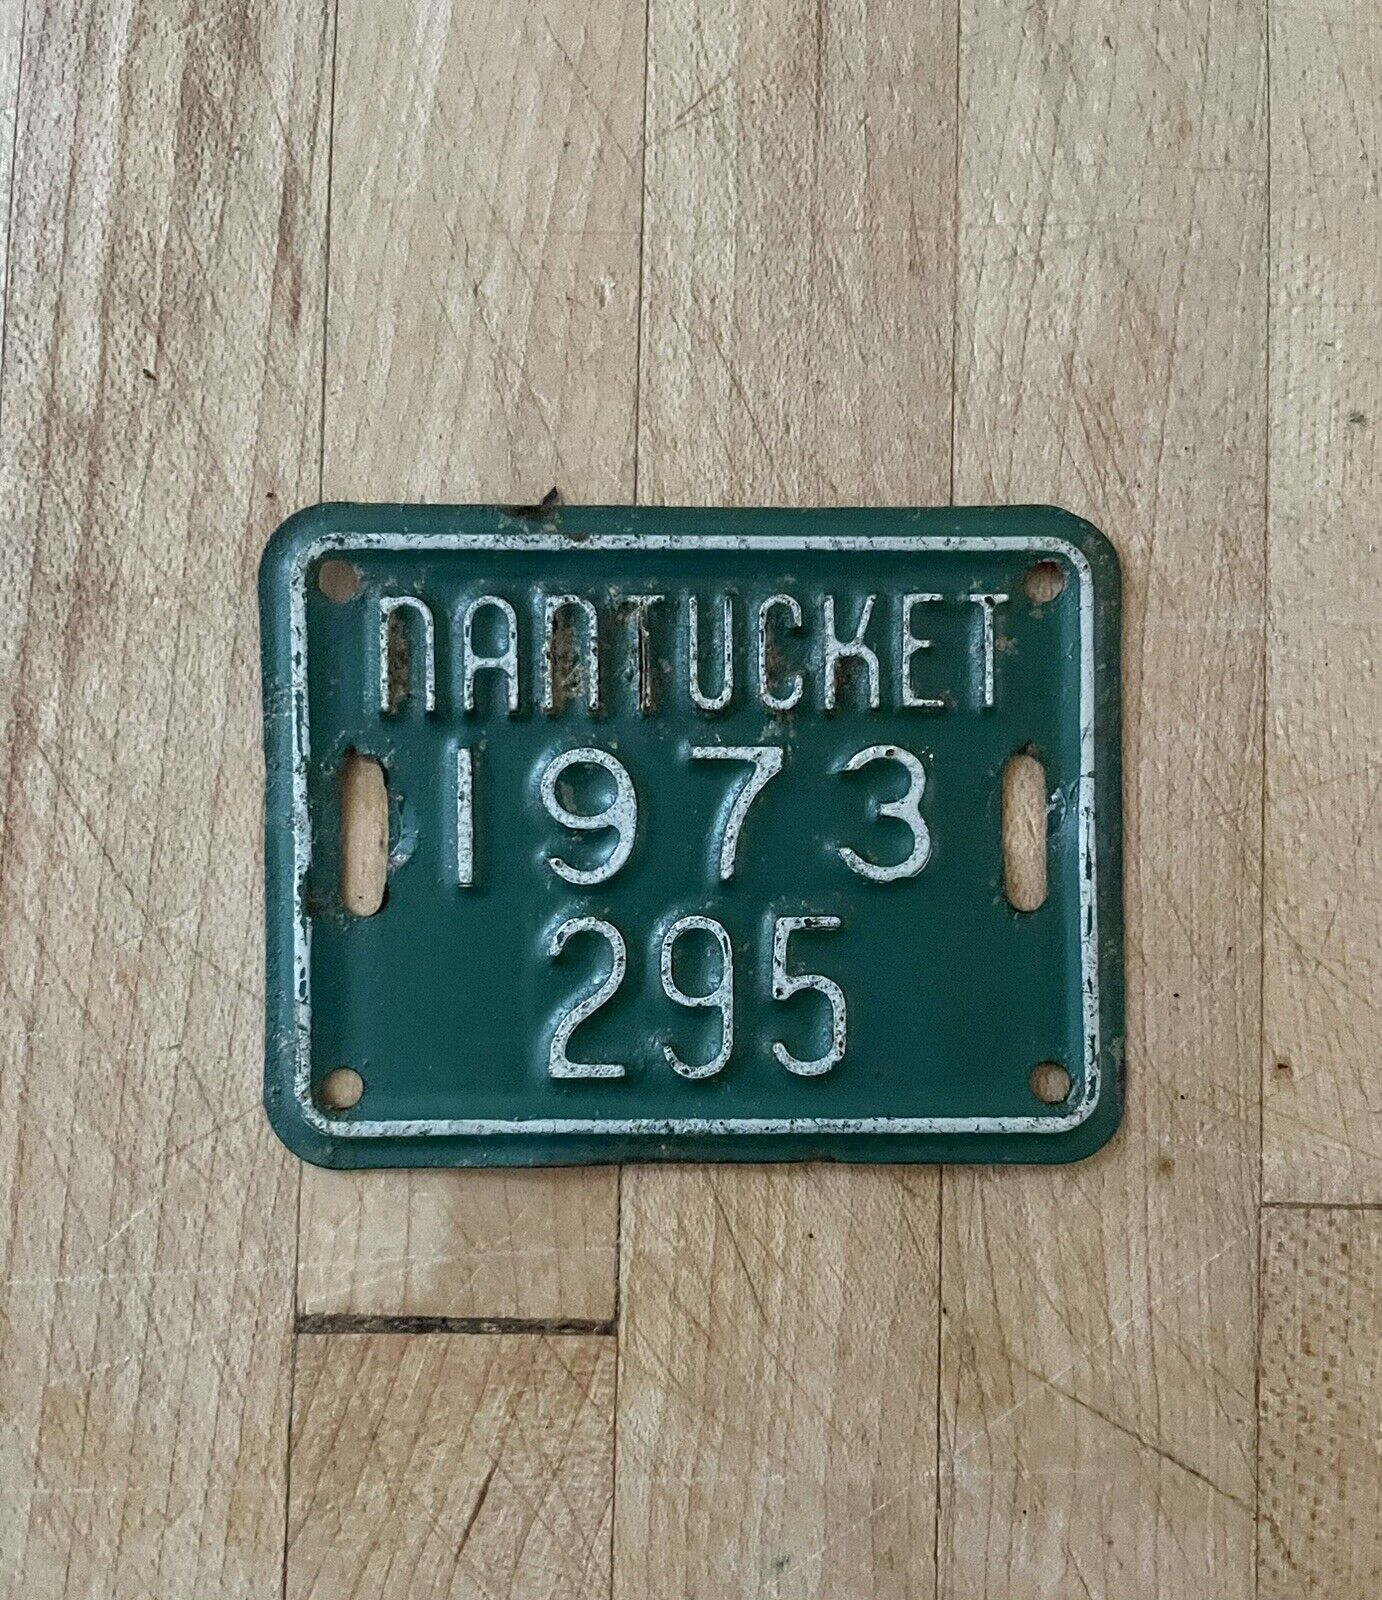 **NANTUCKET Bicycle License Plate - Antique 1973**